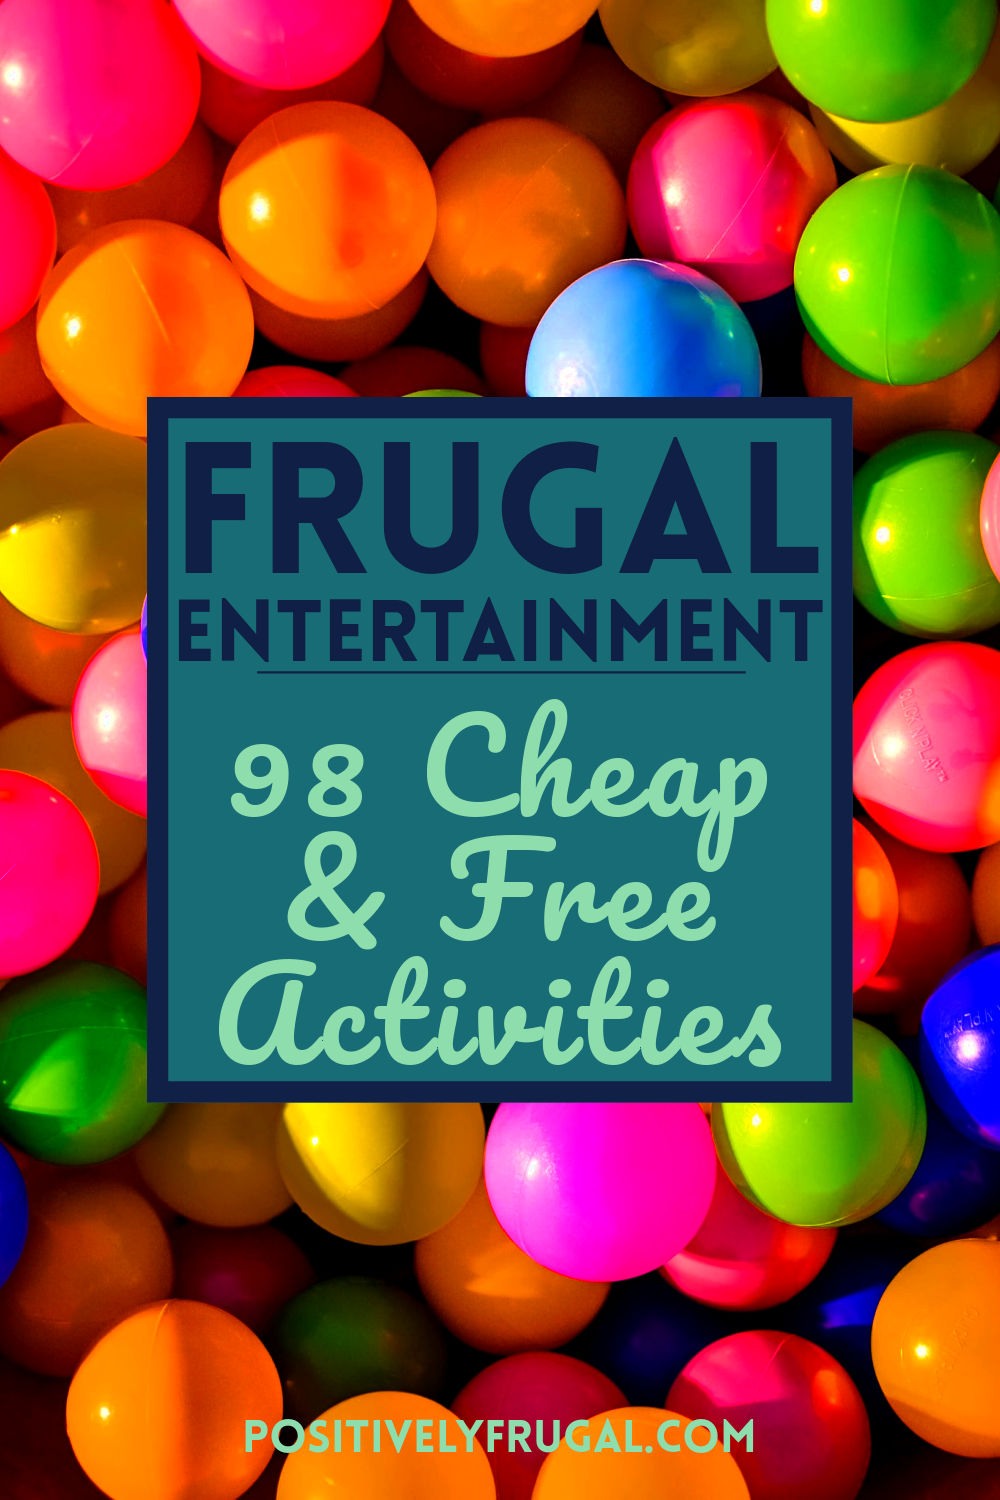 Frugal Entertainment 98 Cheap and Free Activities by PositivelyFrugal.com